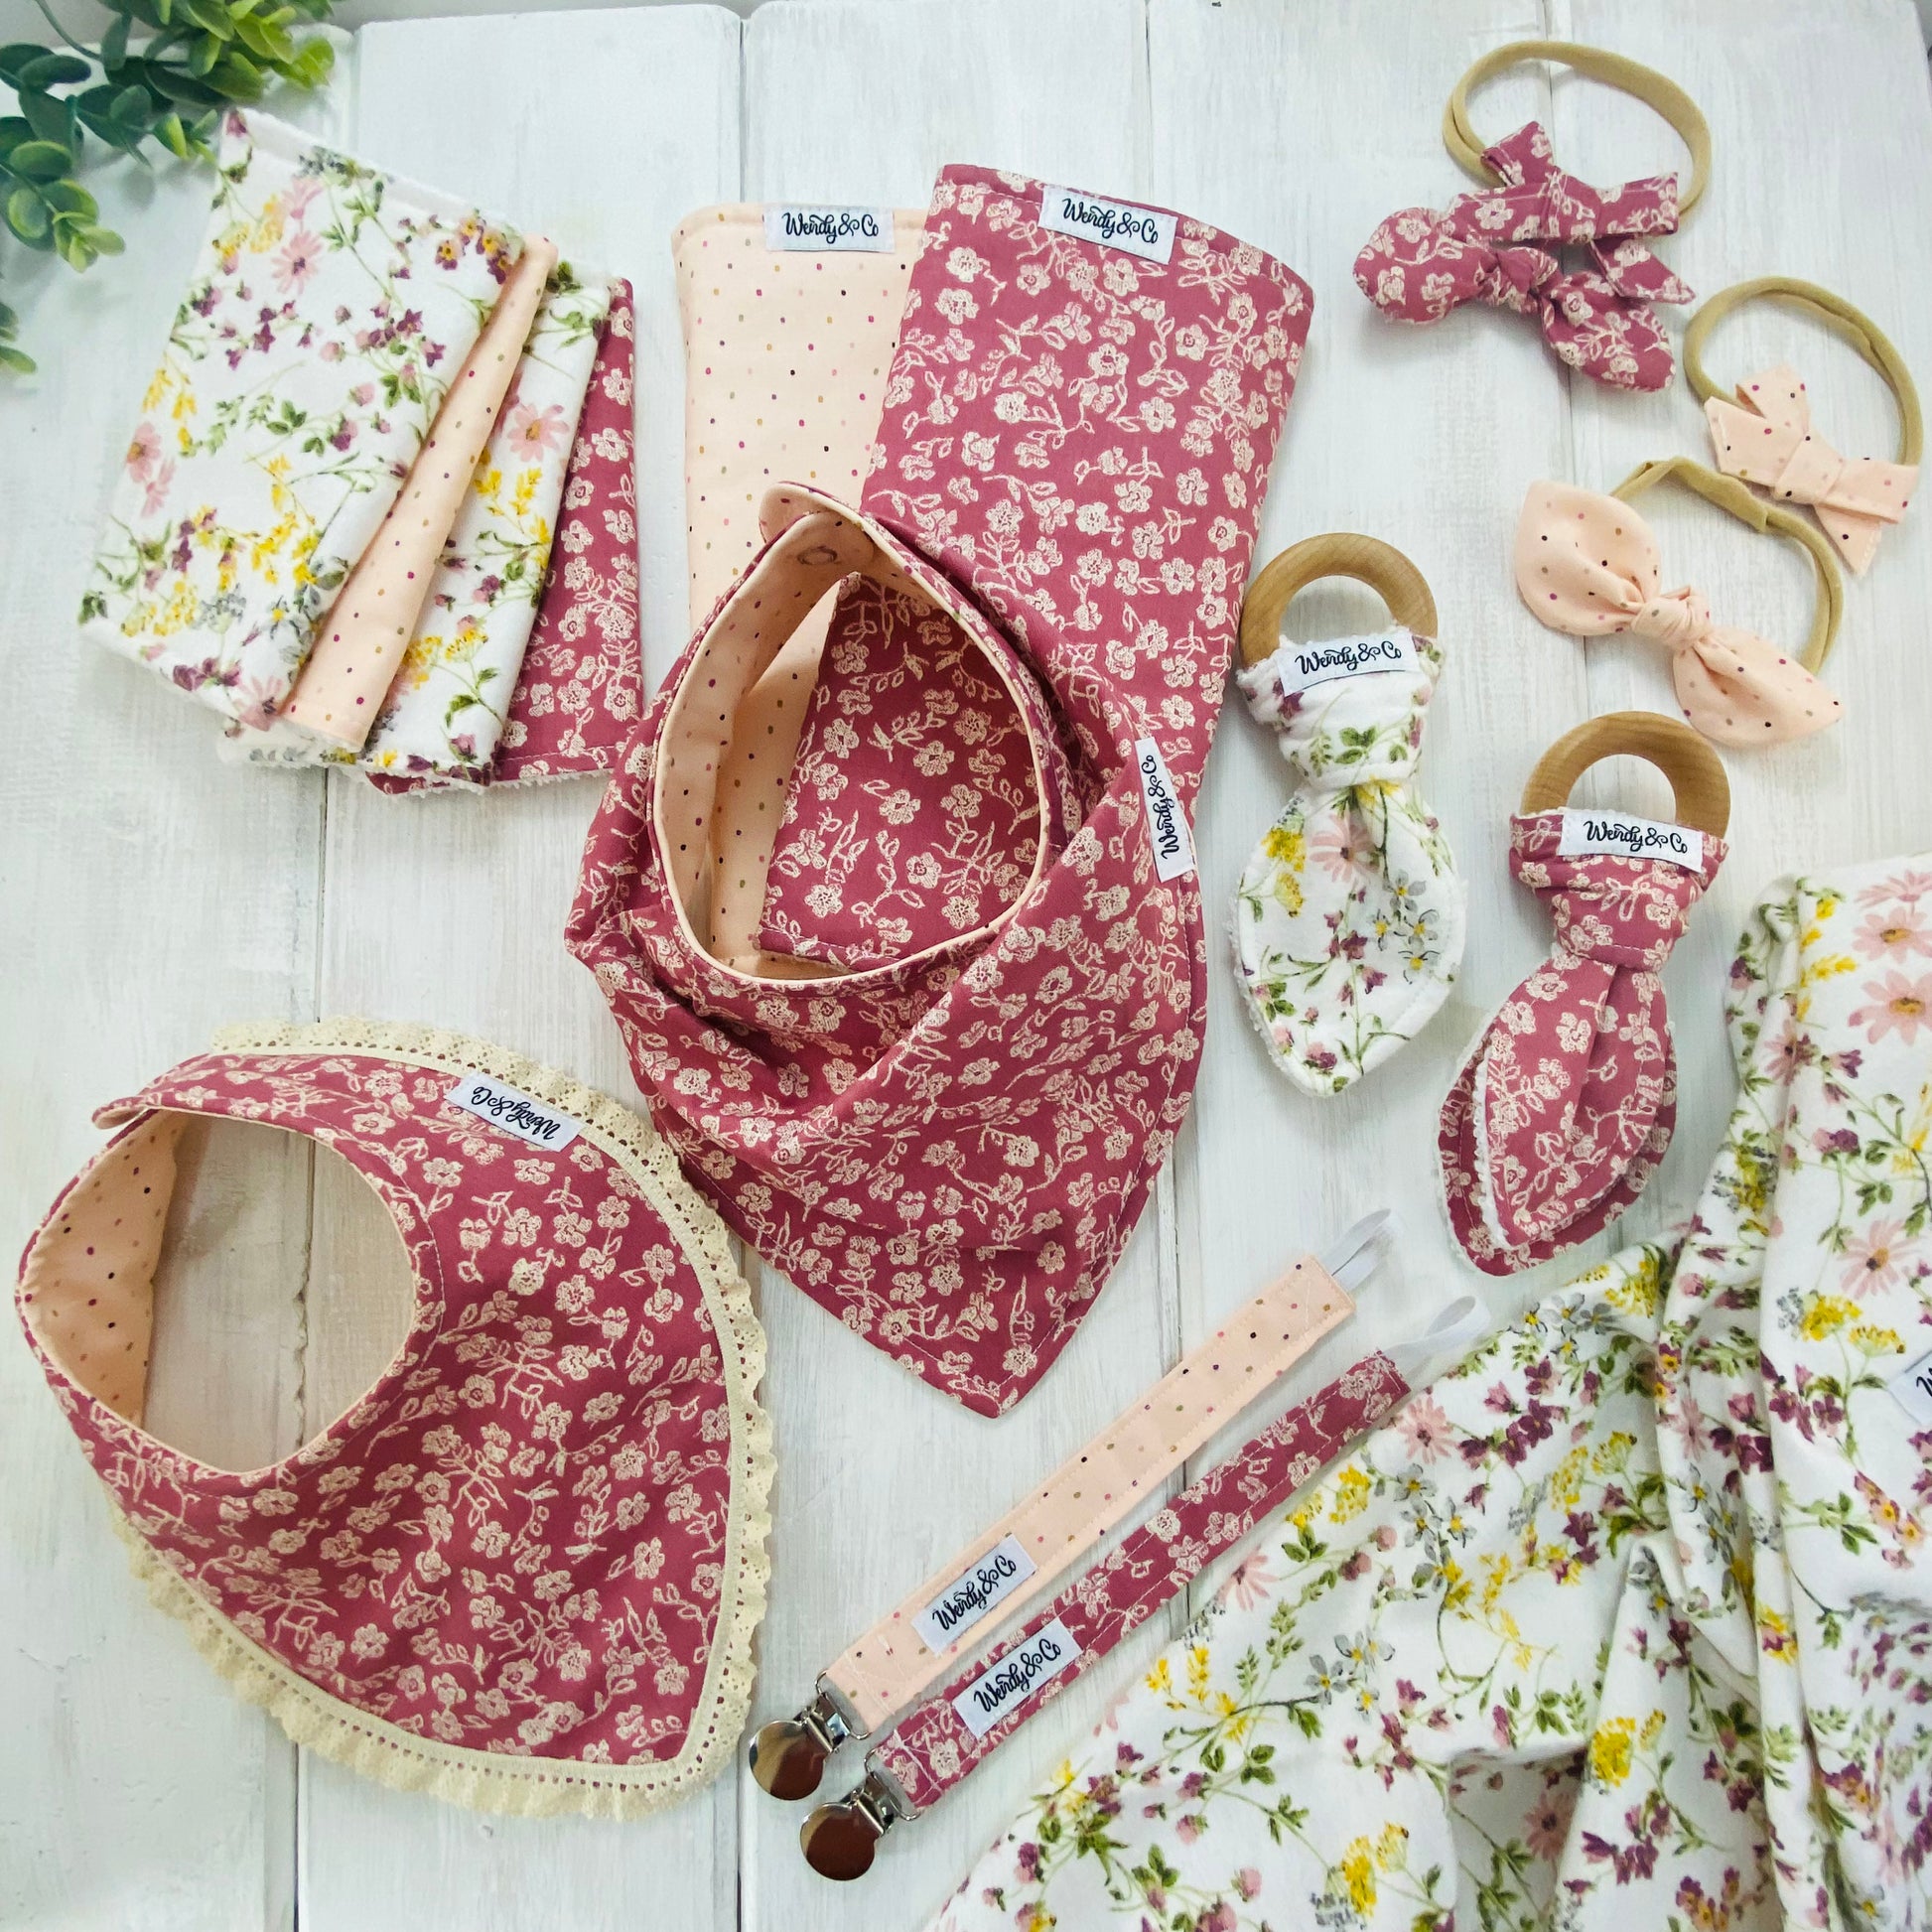 Handmade baby layette in pink floral for baby girl.